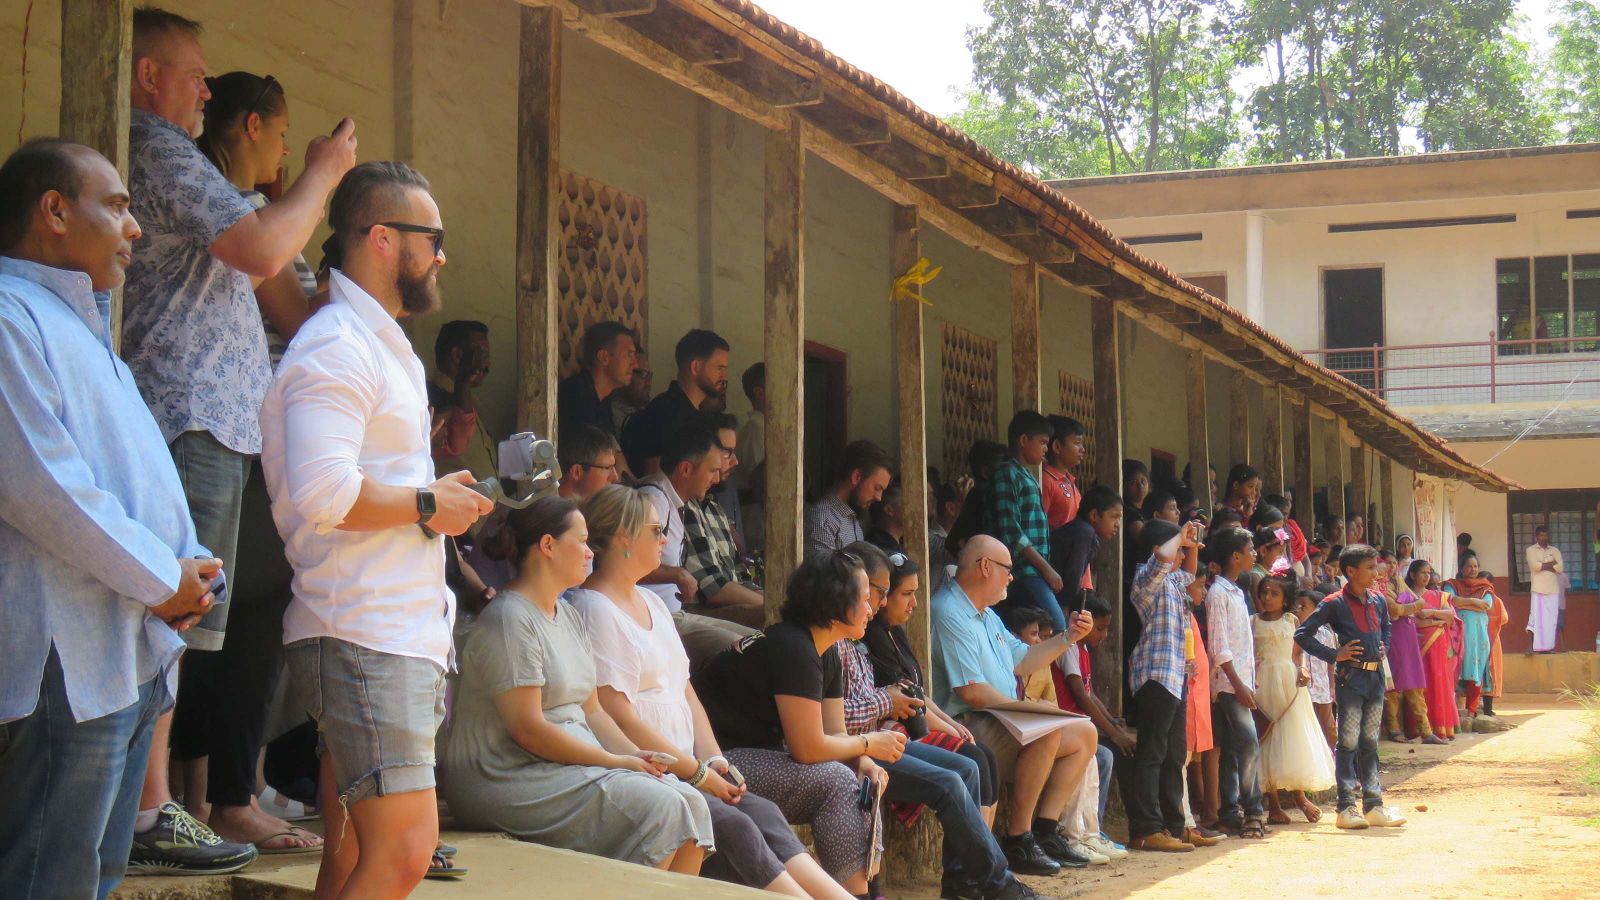 Participants in the 2019 MBA Trip to India visiting a village